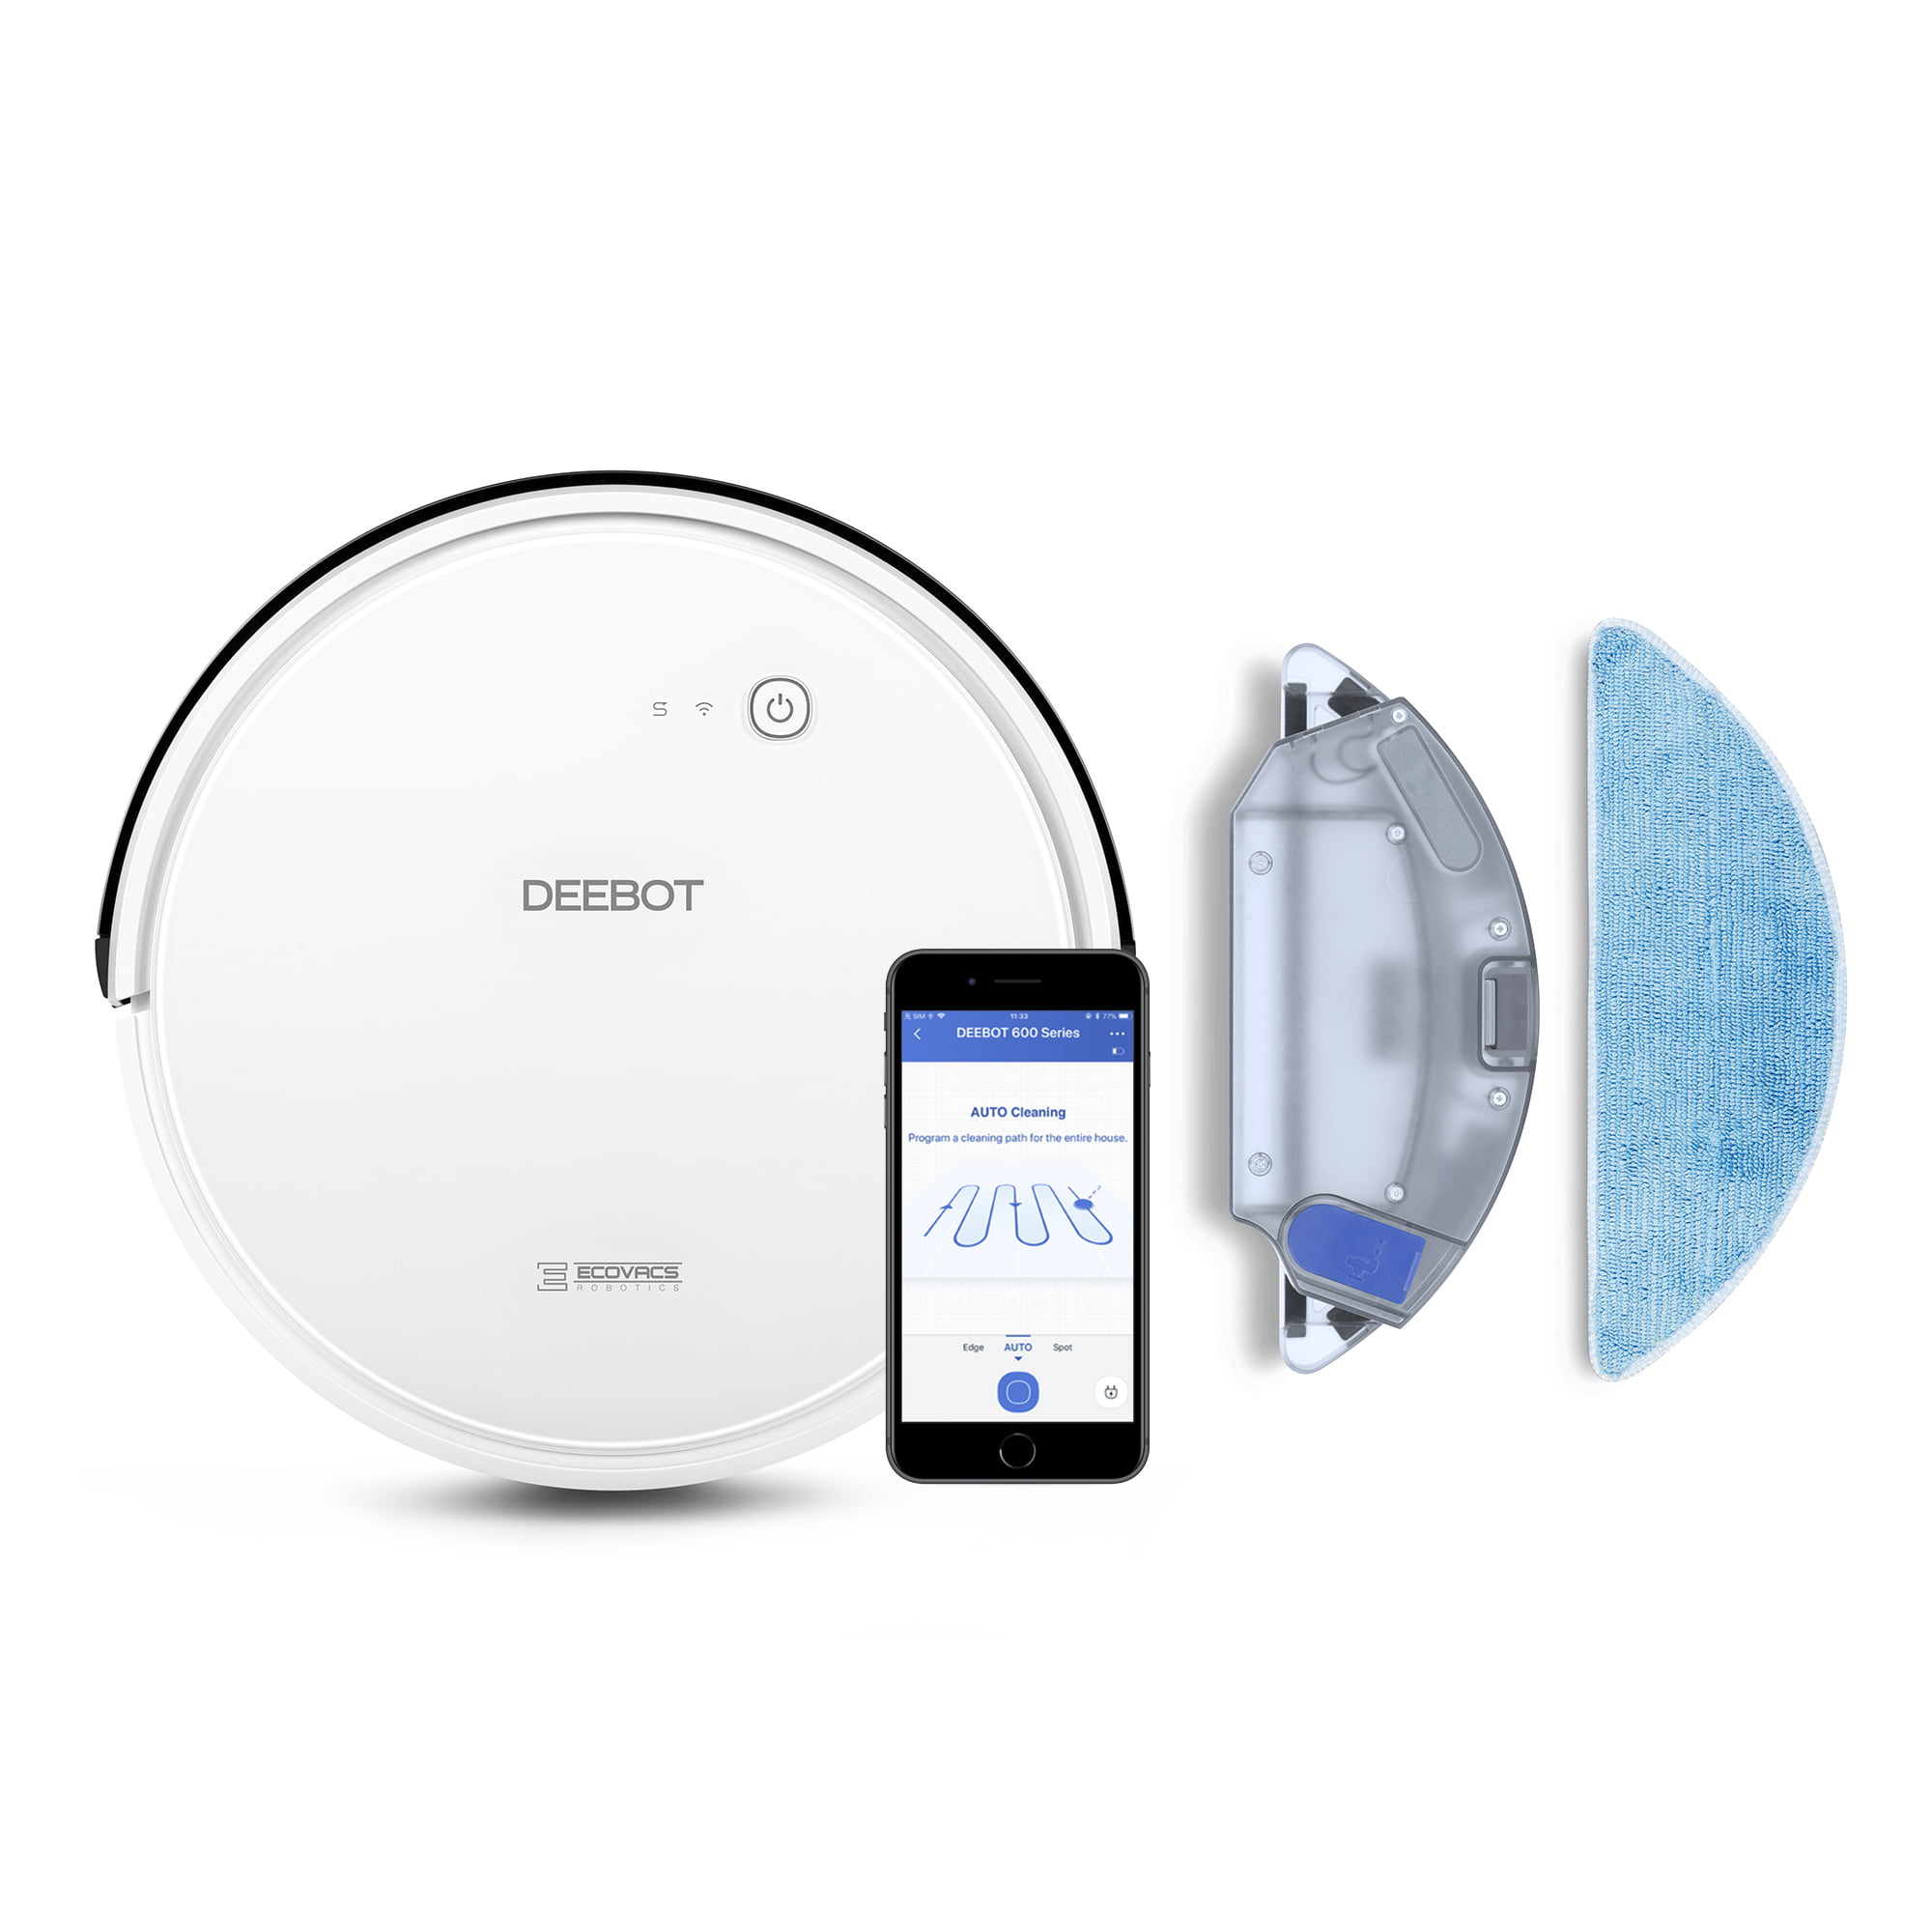 ECOVACS DEEBOT 600 Bundle with an Interchangeable Water Tank for  Convertible Vacuuming or Mopping